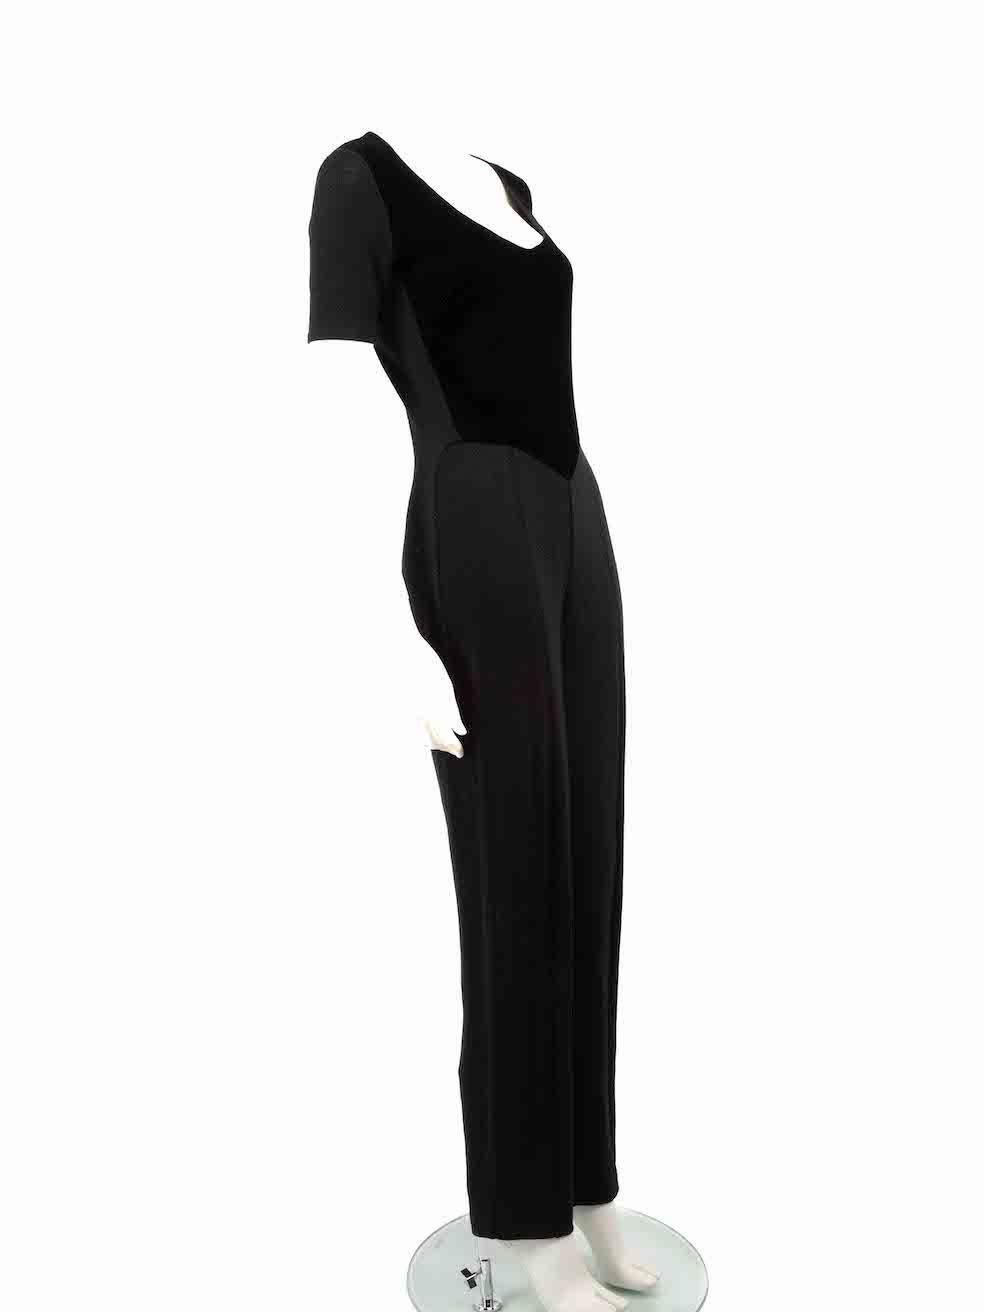 CONDITION is Very good. Minimal wear to jumpsuit is evident. There is a small pluck to the weave on the right side knee area on this used Gianfranco Ferré designer resale item.
 
 
 
 Details
 
 
 Black
 
 Wool
 
 Jumpsuit
 
 Short sleeves
 
 Back